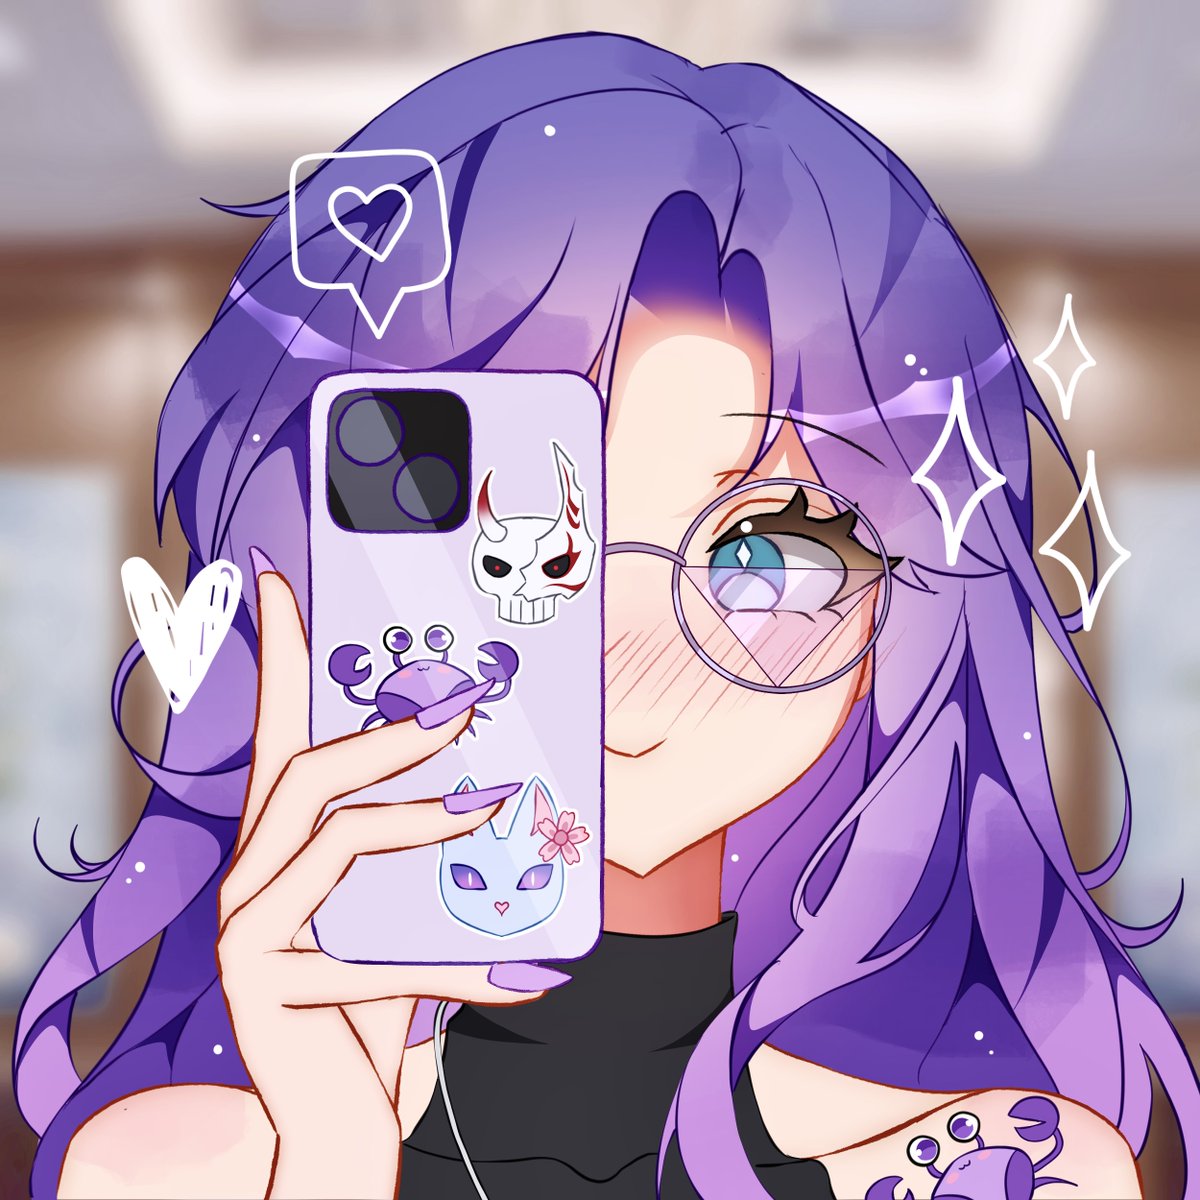 Mirror Selfie YCH for @_mamavale 💜🦀💜

#mamart